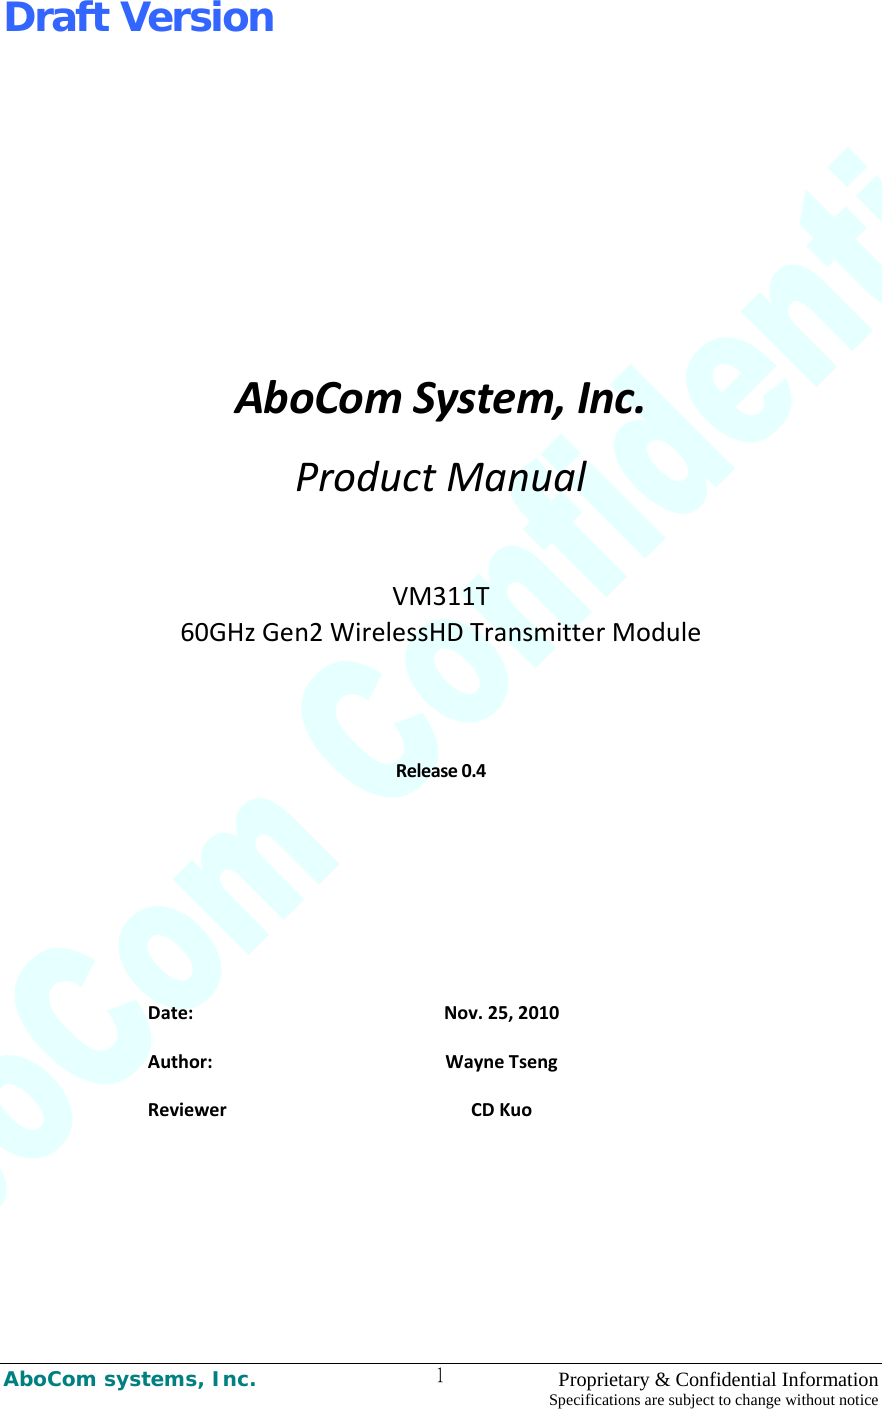 Draft Version AboCom systems, Inc.    Proprietary &amp; Confidential Information Specifications are subject to change without notice 1AboComSystem,Inc.ProductManualVM311T60GHzGen2WirelessHDTransmitterModuleRelease0.4Date:Nov.25,2010Author:WayneTsengReviewerCDKuo